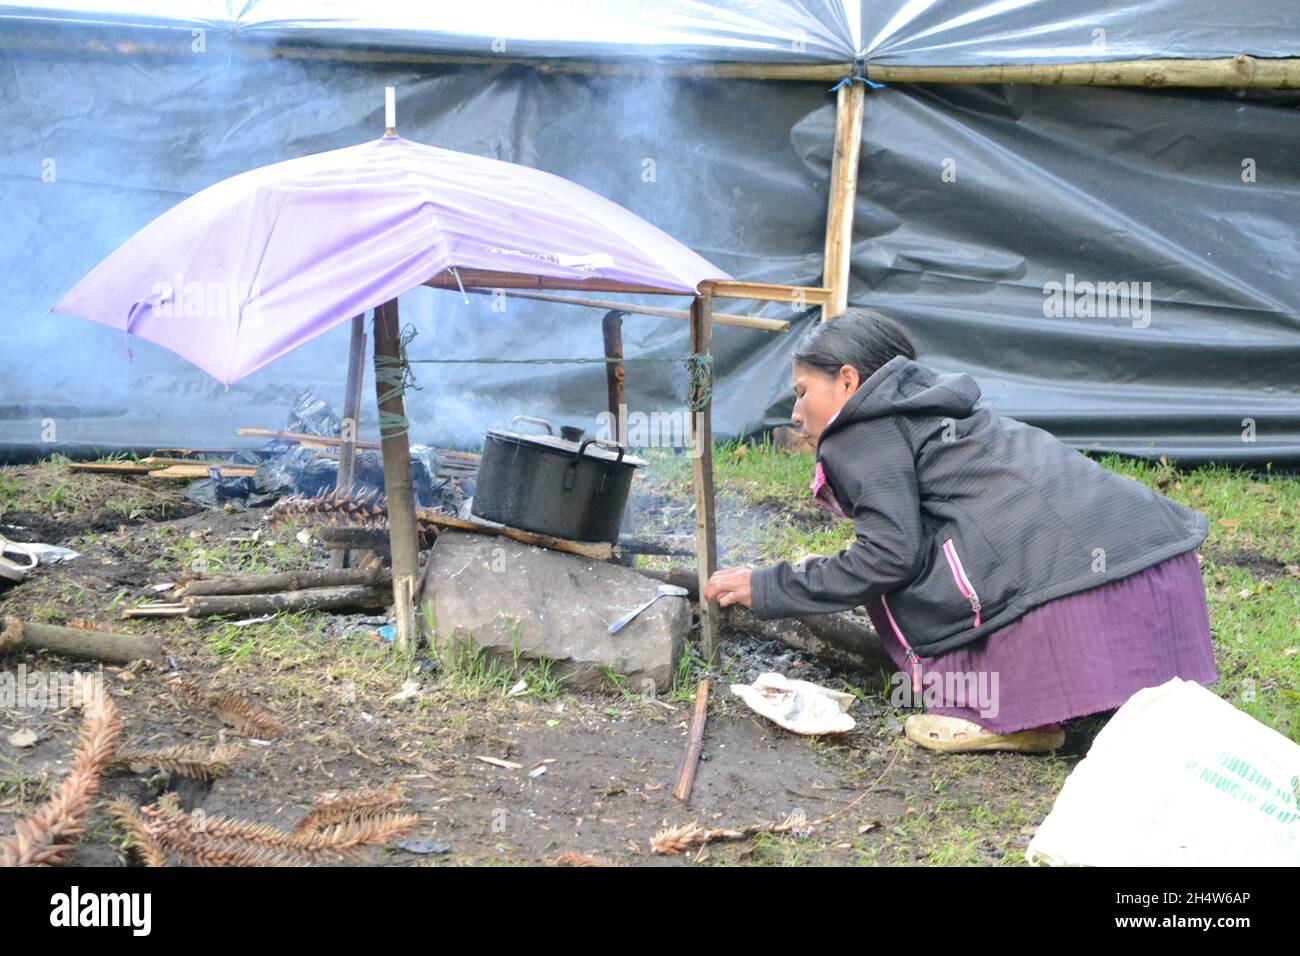 An indigenous girl cooks on a makeshift stove during the almost 30 days of the takeover of Bogota's Parque Nacional by more than 800 indigenous displaced by violence, where they demanded guarantees from the government to be able to return to their territories, after some confrontations with the public force in Bogota, Colombia on October 28, 2021. Stock Photo